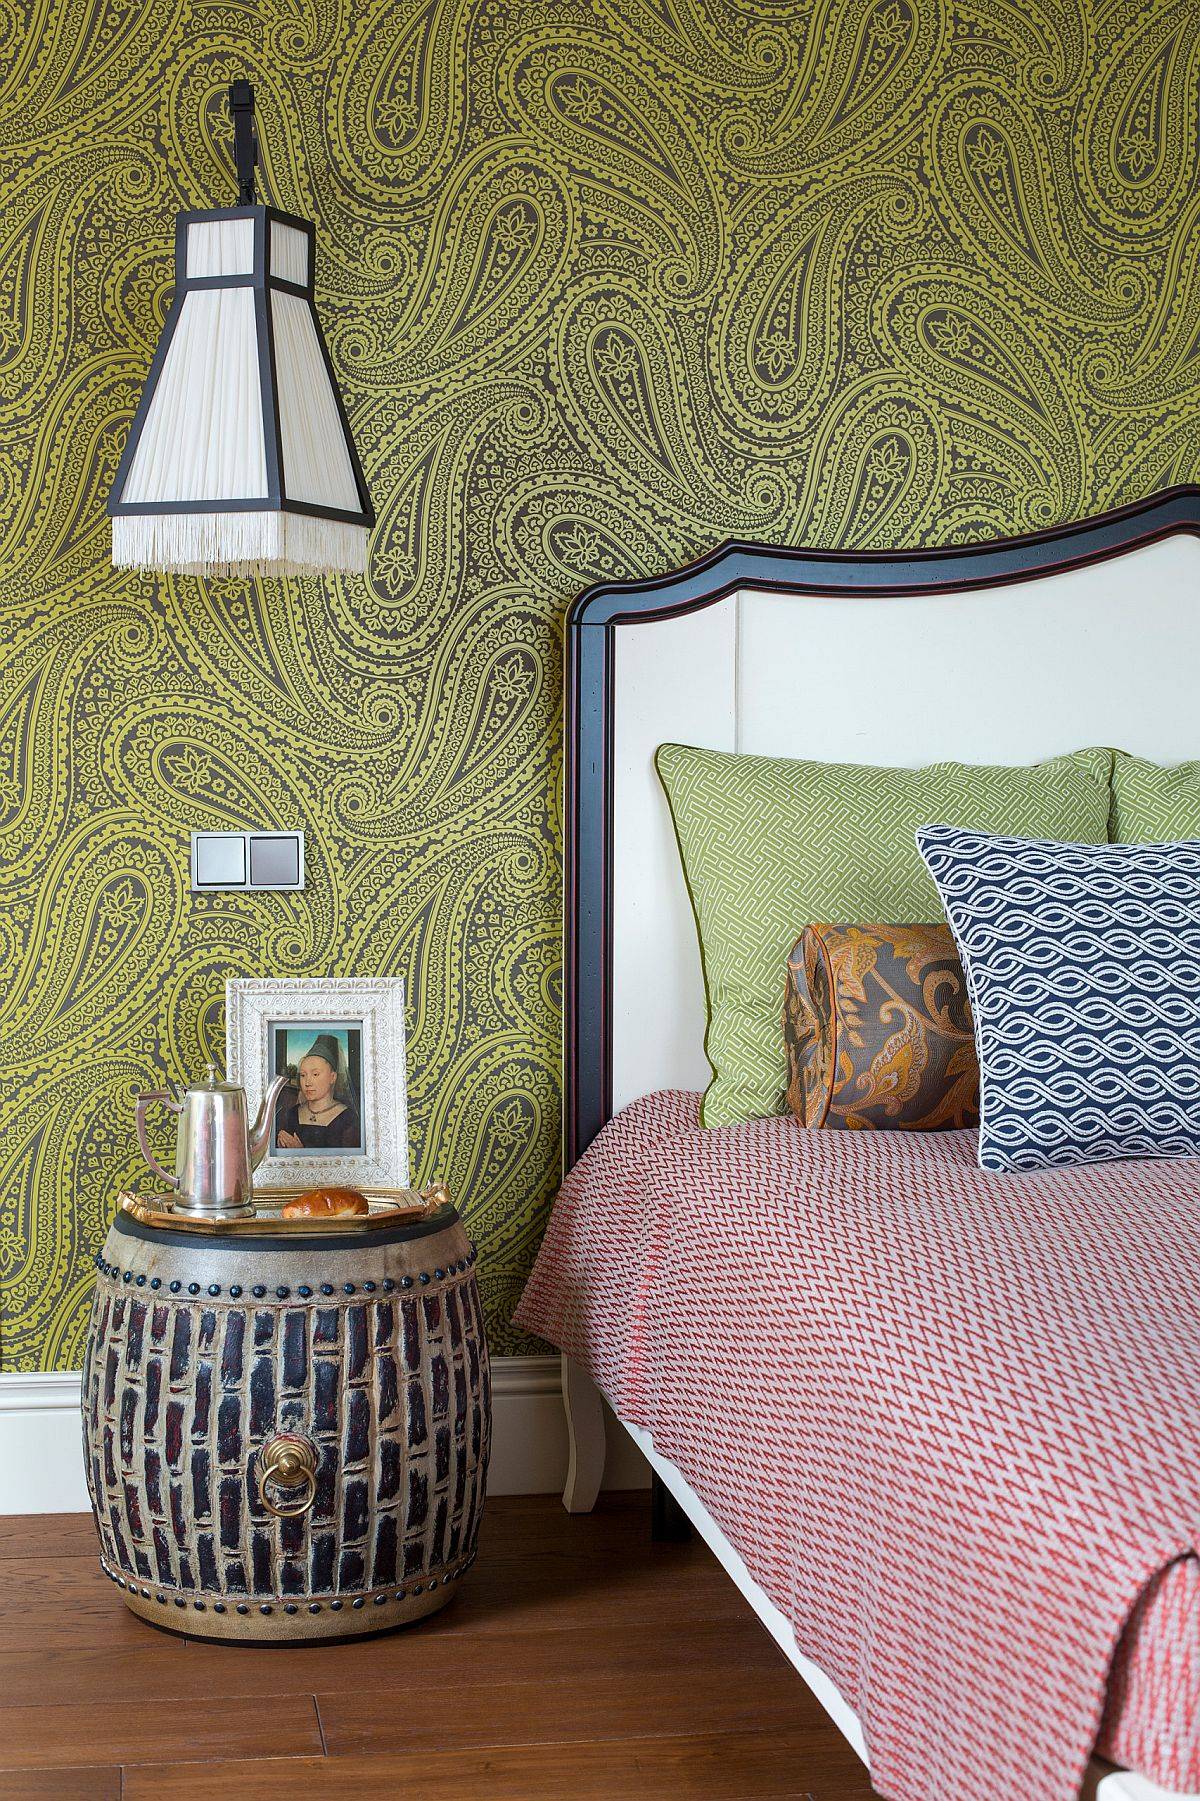 A lovely green wallpaper with a paisley pattern brings both color and contrast to this city